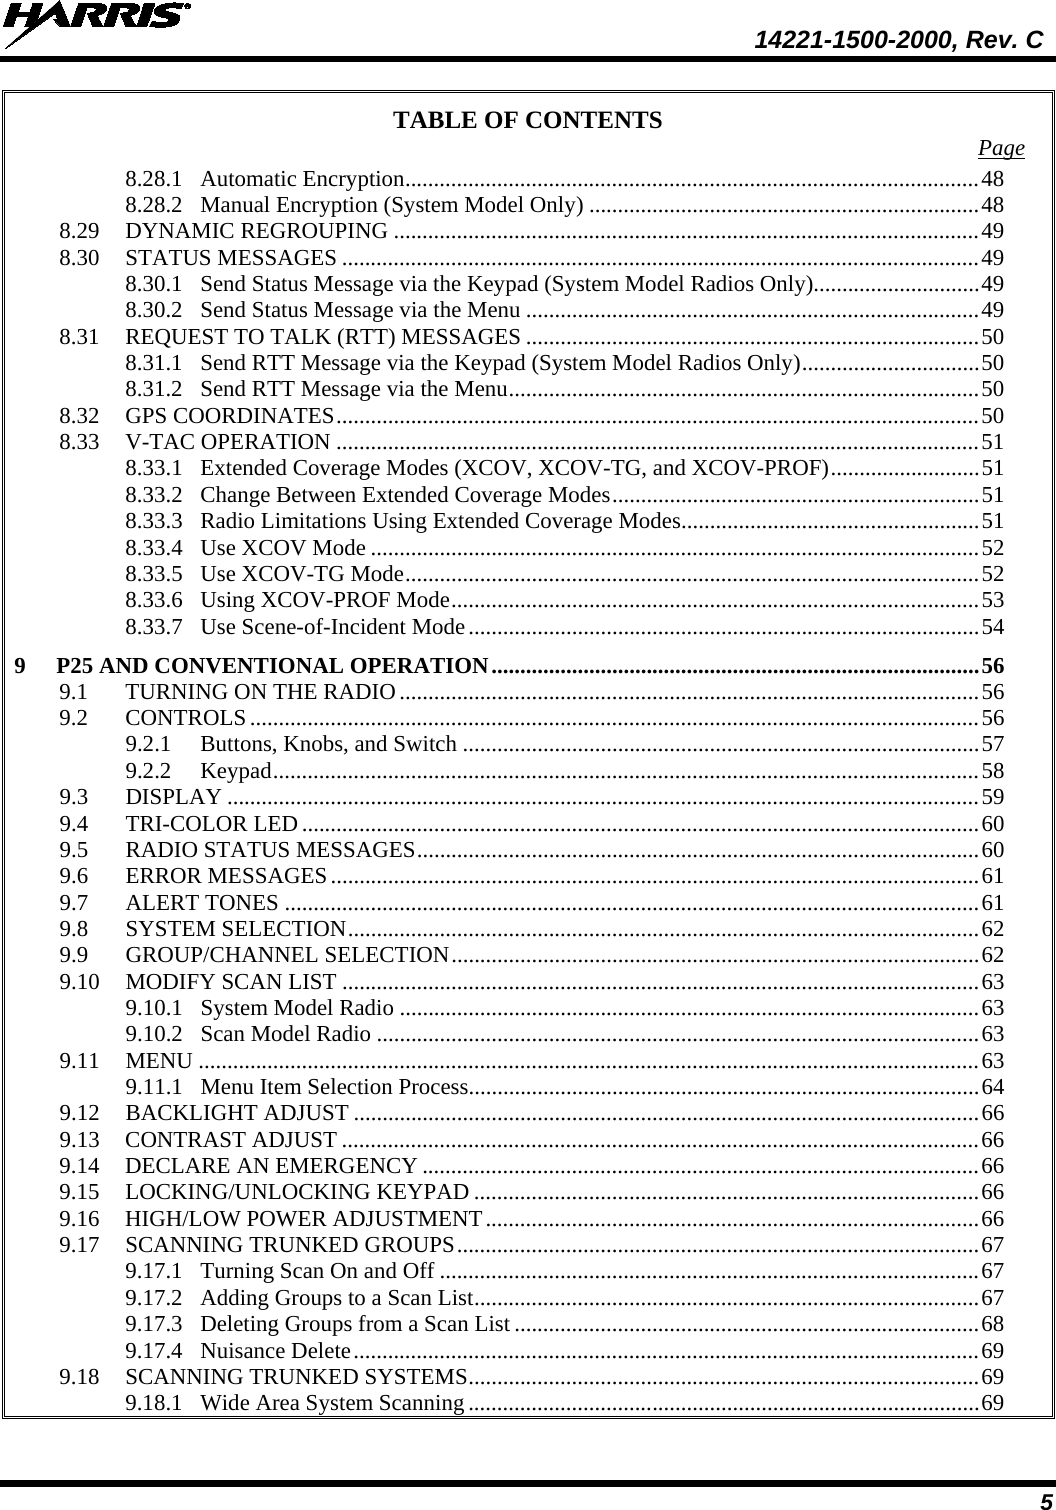  14221-1500-2000, Rev. C 5 TABLE OF CONTENTS Page 8.28.1 Automatic Encryption .................................................................................................... 48 8.28.2 Manual Encryption (System Model Only) .................................................................... 48 8.29 DYNAMIC REGROUPING ...................................................................................................... 49 8.30 STATUS MESSAGES ............................................................................................................... 49 8.30.1 Send Status Message via the Keypad (System Model Radios Only)............................. 49 8.30.2 Send Status Message via the Menu ............................................................................... 49 8.31 REQUEST TO TALK (RTT) MESSAGES ............................................................................... 50 8.31.1 Send RTT Message via the Keypad (System Model Radios Only) ............................... 50 8.31.2 Send RTT Message via the Menu .................................................................................. 50 8.32 GPS COORDINATES ................................................................................................................ 50 8.33 V-TAC OPERATION ................................................................................................................ 51 8.33.1 Extended Coverage Modes (XCOV, XCOV-TG, and XCOV-PROF) .......................... 51 8.33.2 Change Between Extended Coverage Modes ................................................................ 51 8.33.3 Radio Limitations Using Extended Coverage Modes .................................................... 51 8.33.4 Use XCOV Mode .......................................................................................................... 52 8.33.5 Use XCOV-TG Mode .................................................................................................... 52 8.33.6 Using XCOV-PROF Mode ............................................................................................ 53 8.33.7 Use Scene-of-Incident Mode ......................................................................................... 54 9 P25 AND CONVENTIONAL OPERATION ..................................................................................... 56 9.1 TURNING ON THE RADIO ..................................................................................................... 56 9.2 CONTROLS ............................................................................................................................... 56 9.2.1 Buttons, Knobs, and Switch .......................................................................................... 57 9.2.2 Keypad ........................................................................................................................... 58 9.3 DISPLAY ................................................................................................................................... 59 9.4 TRI-COLOR LED ...................................................................................................................... 60 9.5 RADIO STATUS MESSAGES .................................................................................................. 60 9.6 ERROR MESSAGES ................................................................................................................. 61 9.7 ALERT TONES ......................................................................................................................... 61 9.8 SYSTEM SELECTION .............................................................................................................. 62 9.9 GROUP/CHANNEL SELECTION ............................................................................................ 62 9.10 MODIFY SCAN LIST ............................................................................................................... 63 9.10.1 System Model Radio ..................................................................................................... 63 9.10.2 Scan Model Radio ......................................................................................................... 63 9.11 MENU ........................................................................................................................................ 63 9.11.1 Menu Item Selection Process ......................................................................................... 64 9.12 BACKLIGHT ADJUST ............................................................................................................. 66 9.13 CONTRAST ADJUST ............................................................................................................... 66 9.14 DECLARE AN EMERGENCY ................................................................................................. 66 9.15 LOCKING/UNLOCKING KEYPAD ........................................................................................ 66 9.16 HIGH/LOW POWER ADJUSTMENT ...................................................................................... 66 9.17 SCANNING TRUNKED GROUPS ........................................................................................... 67 9.17.1 Turning Scan On and Off .............................................................................................. 67 9.17.2 Adding Groups to a Scan List ........................................................................................ 67 9.17.3 Deleting Groups from a Scan List ................................................................................. 68 9.17.4 Nuisance Delete ............................................................................................................. 69 9.18 SCANNING TRUNKED SYSTEMS ......................................................................................... 69 9.18.1 Wide Area System Scanning ......................................................................................... 69 